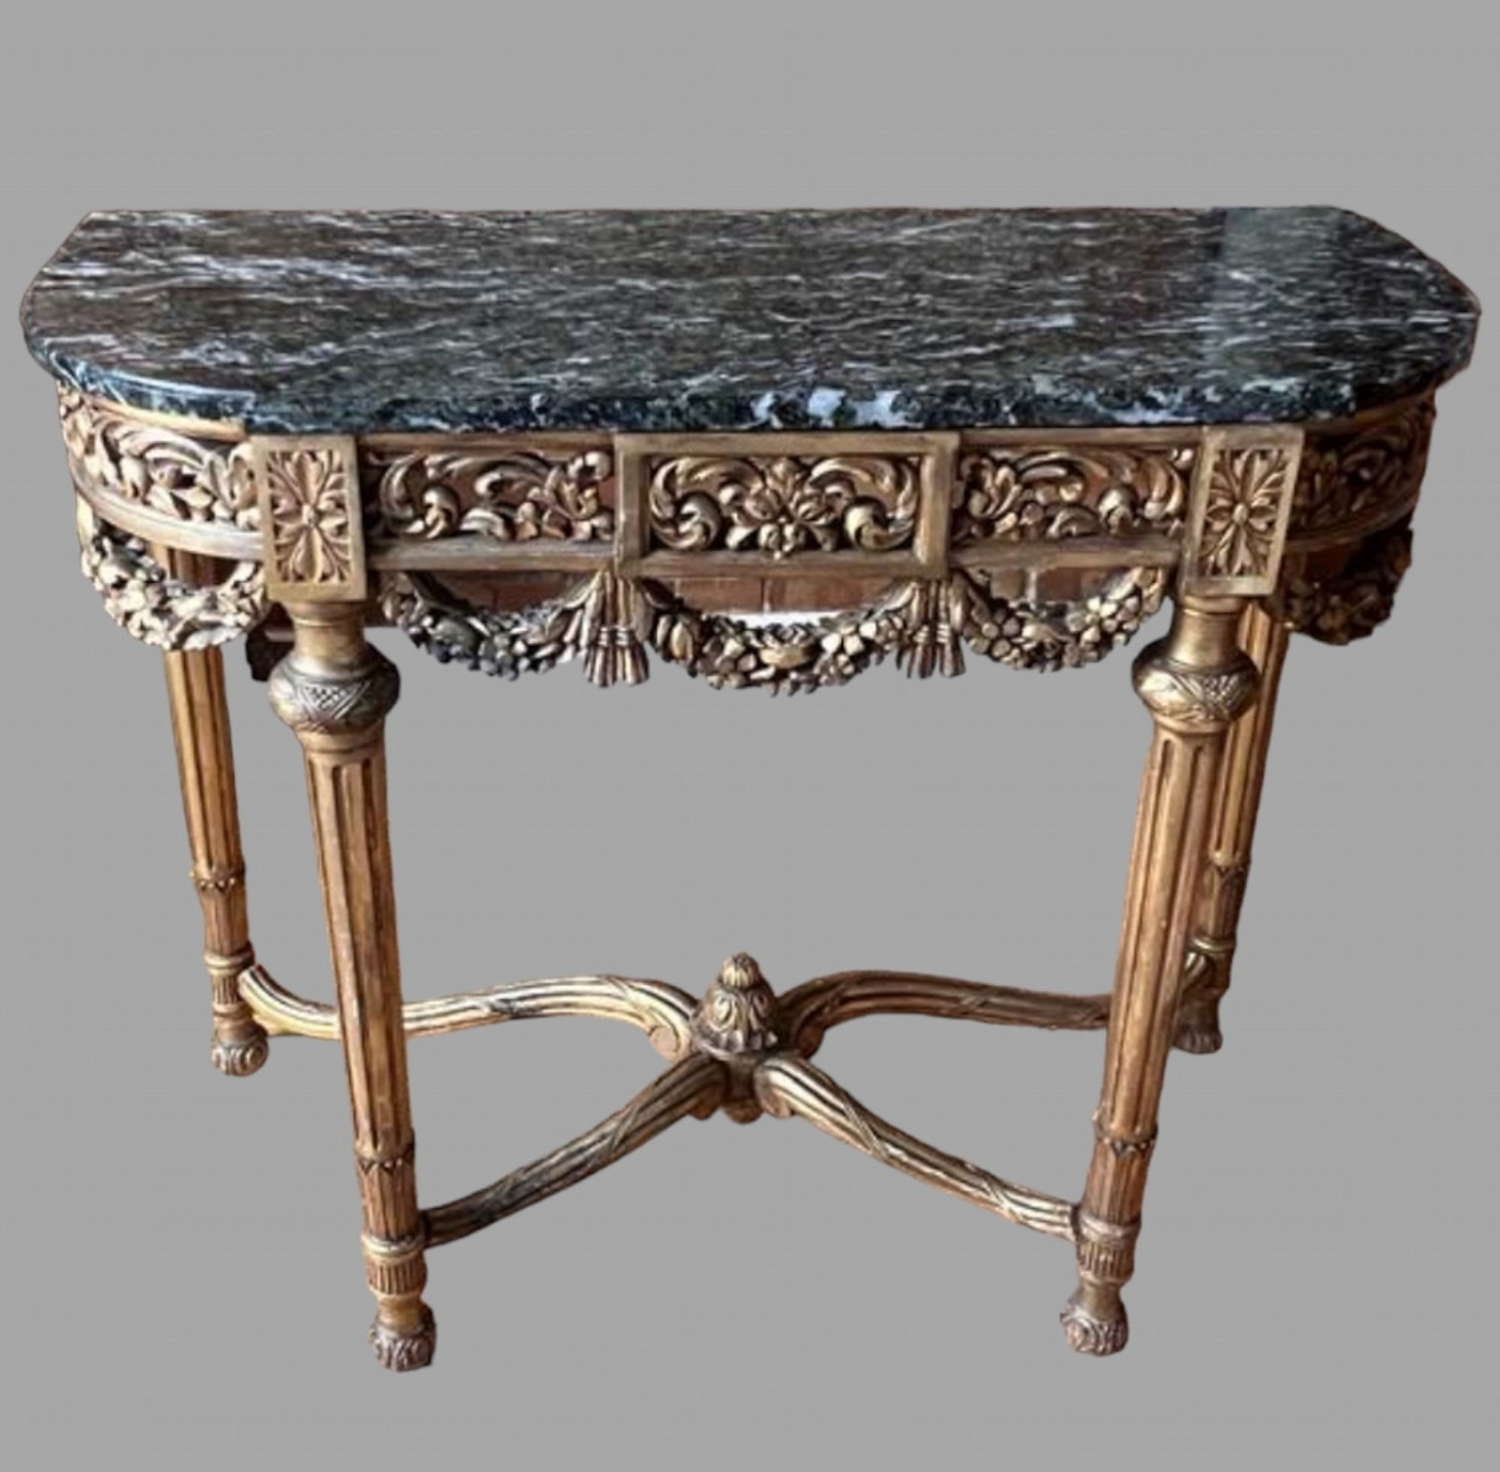 A 19thc French Marble Topped Console Table